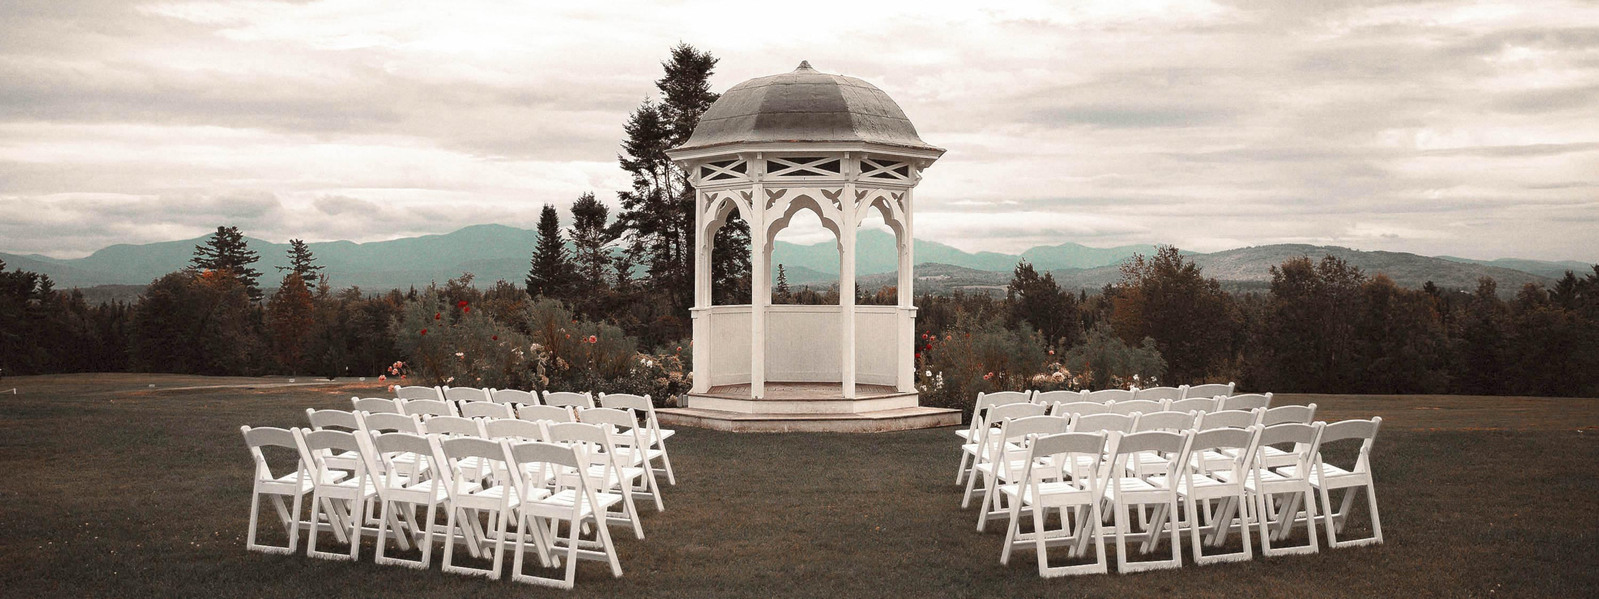 A photo of a beautiful outdoor wedding venue in White Mountains, NH. Photographer Ivan Djikaev/Mind On Photography.